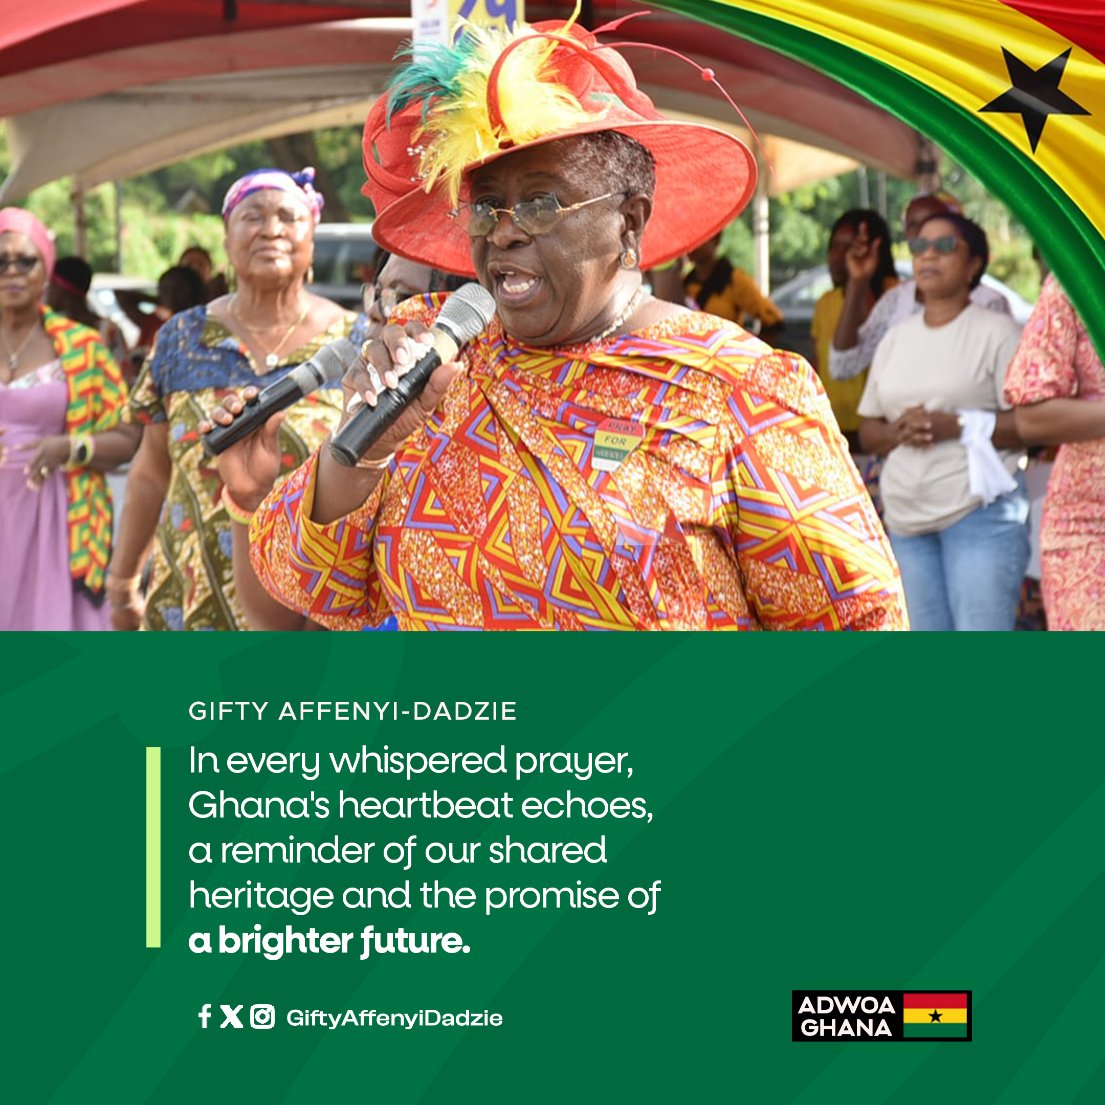 In every whispered prayer, Ghana's heartbeat echoes, a reminder of our shared heritage and the promise of a brighter future.

#GiftyAffenyiDadzie
#LoveForGod
#LoveForCountry
#womenleadership
#womenoffaith
#womanofprayer